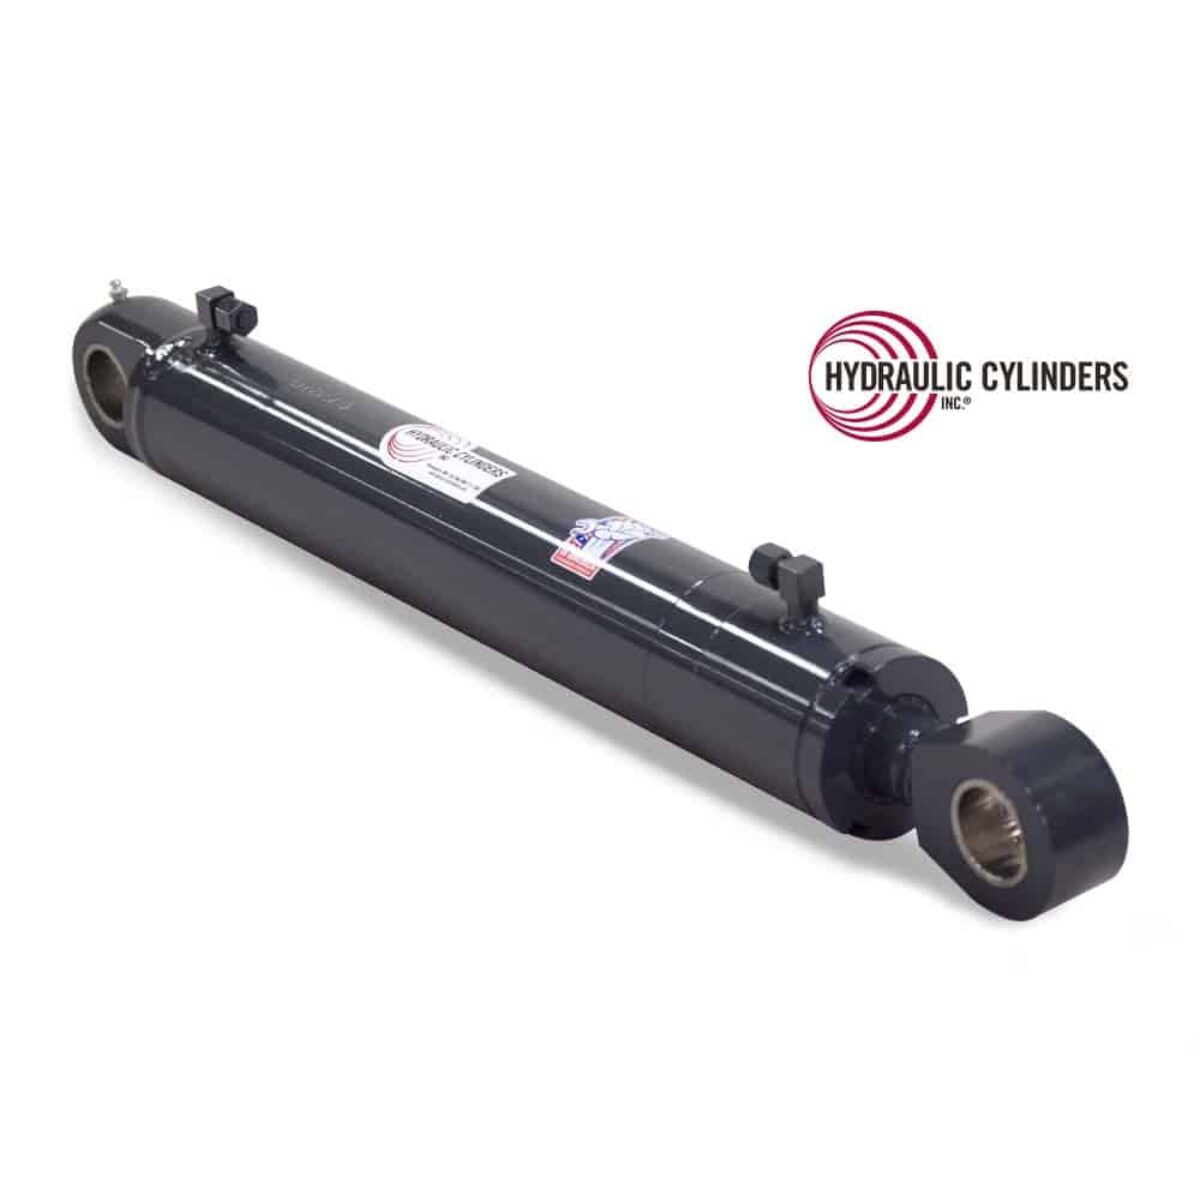 1024420472 - Replacement Swing Hydraulic Cylinder for KX121-3 